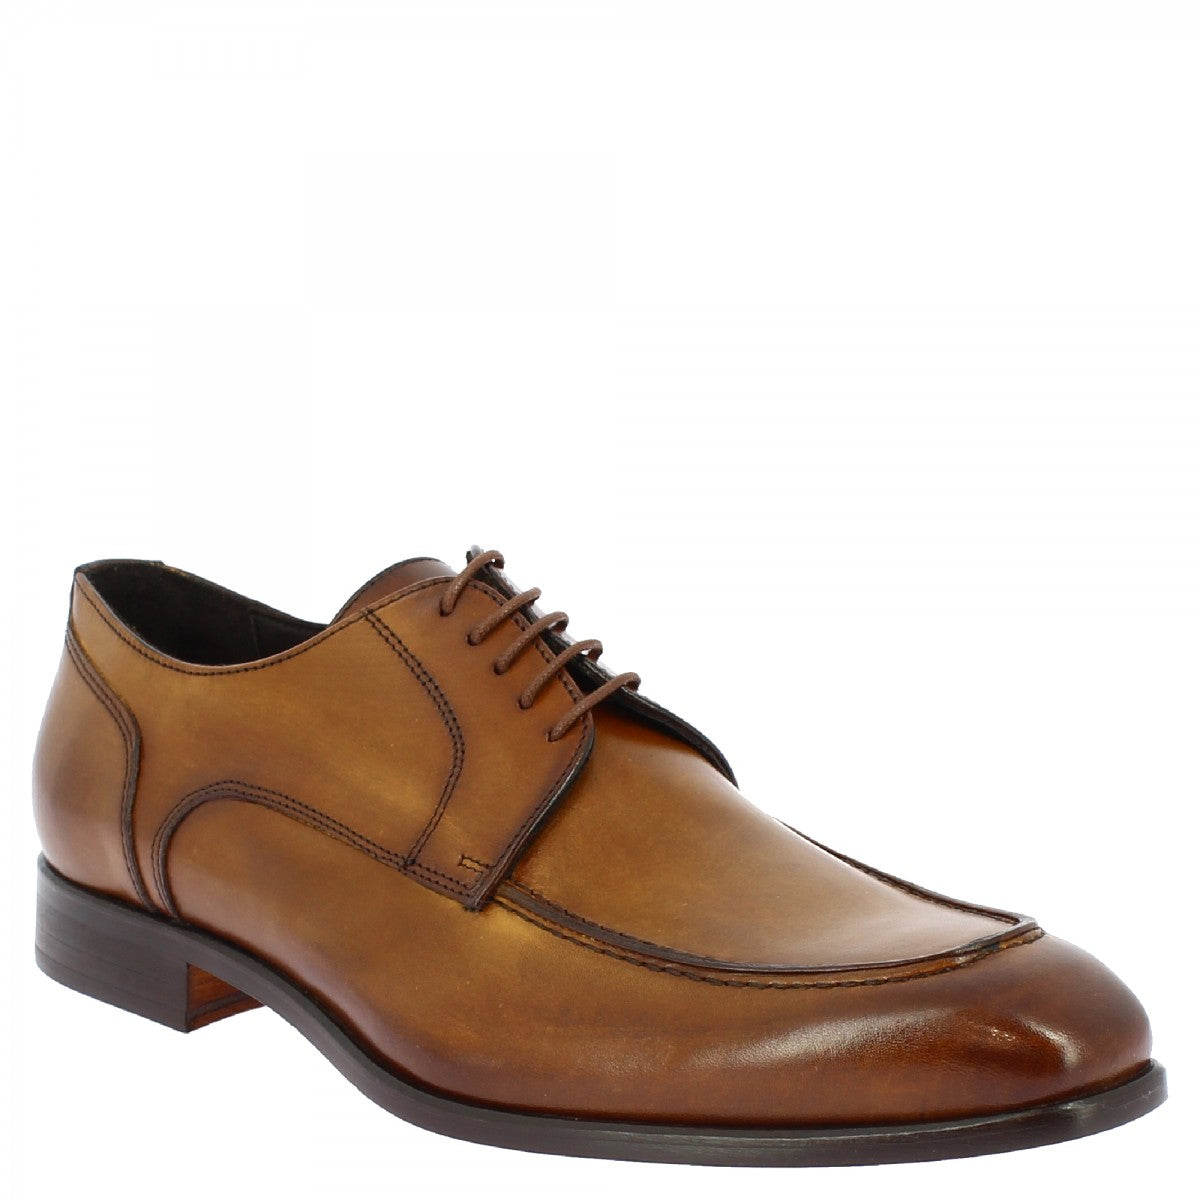 Men's handmade lace-up shoes in brown calf leather